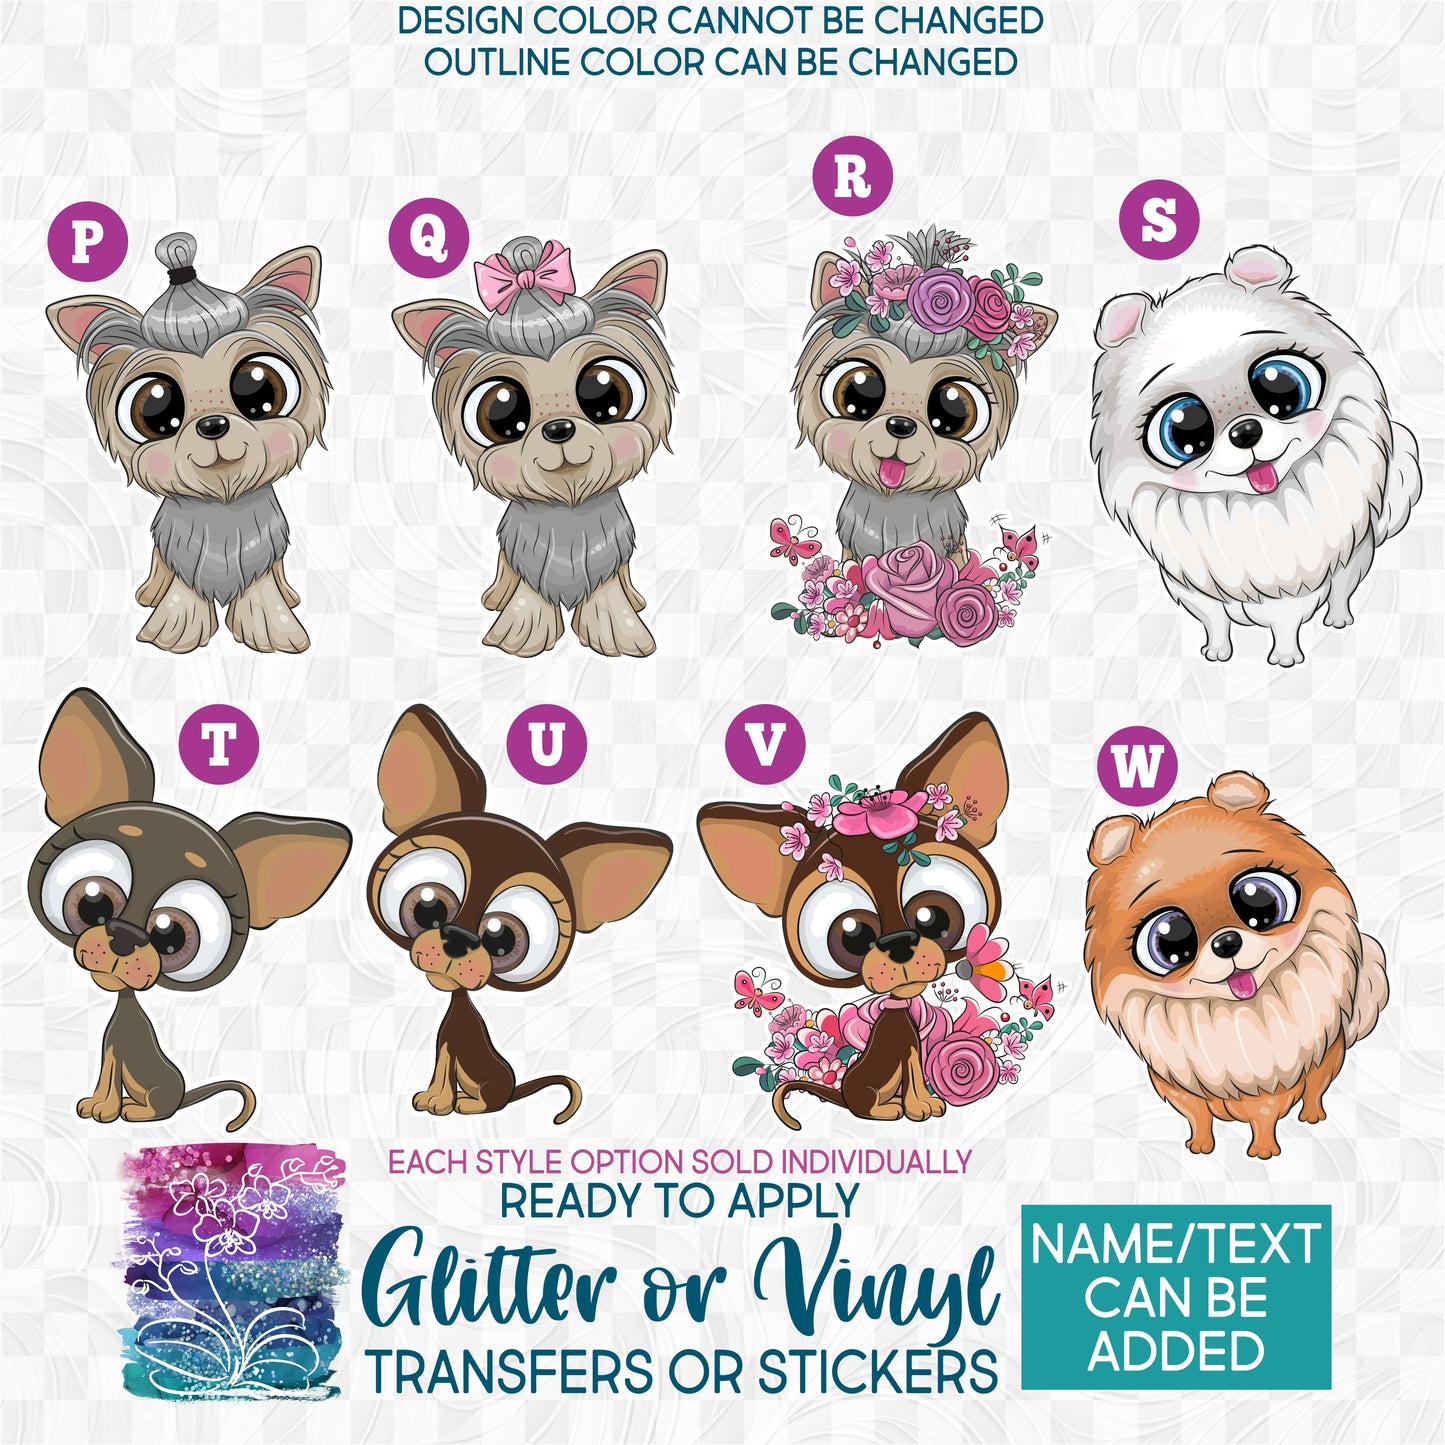 (s133-D) Cute Dog Puppy Glitter or Vinyl Iron-On Transfer or Sticker